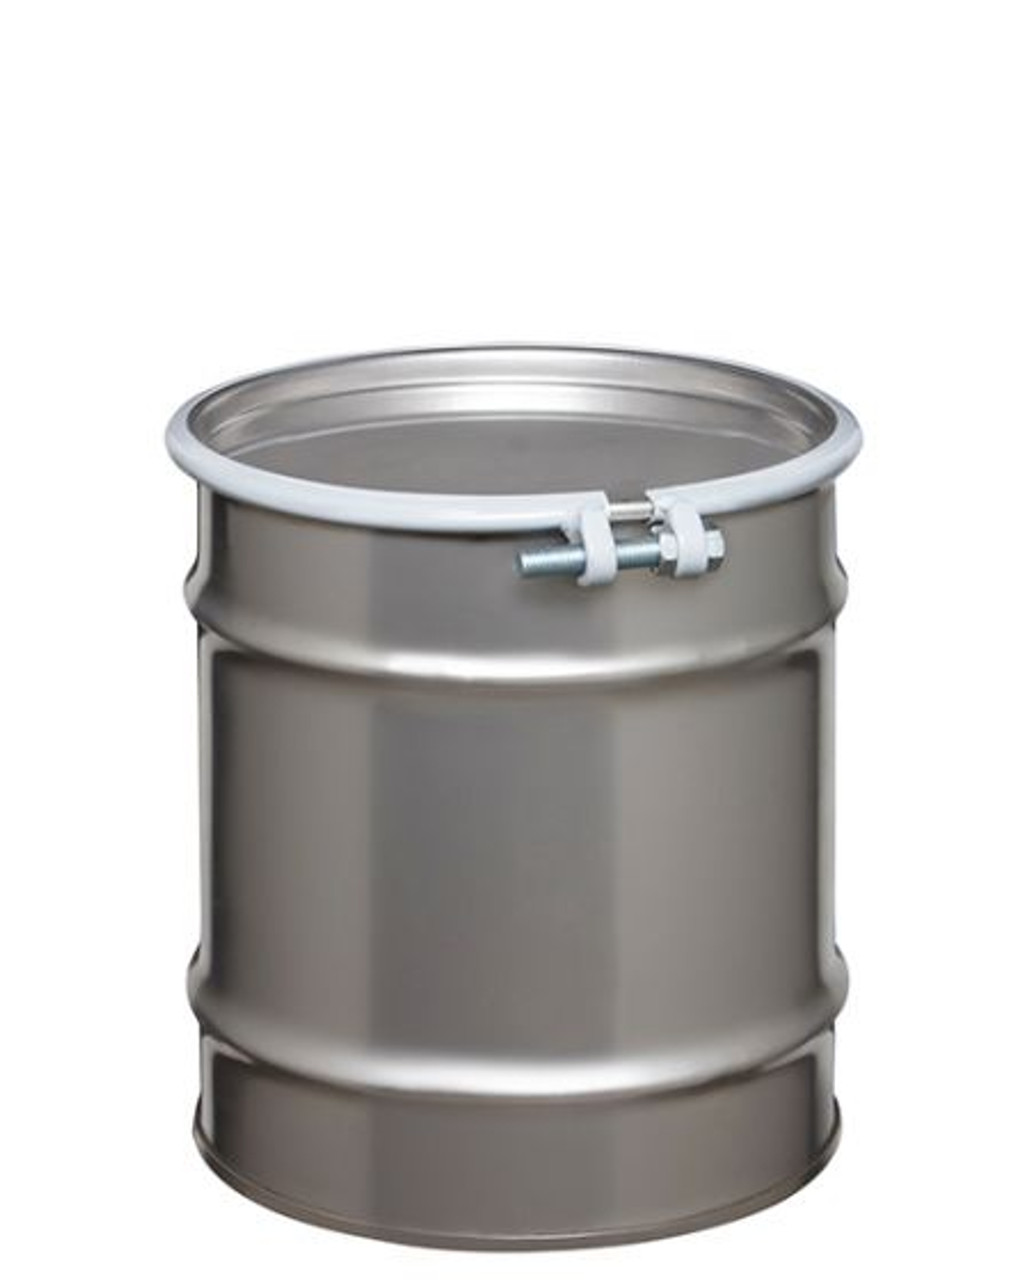 20 GALLON OPEN HEAD STAINLESS STEEL DRUM, UN RATED, BOLT RING